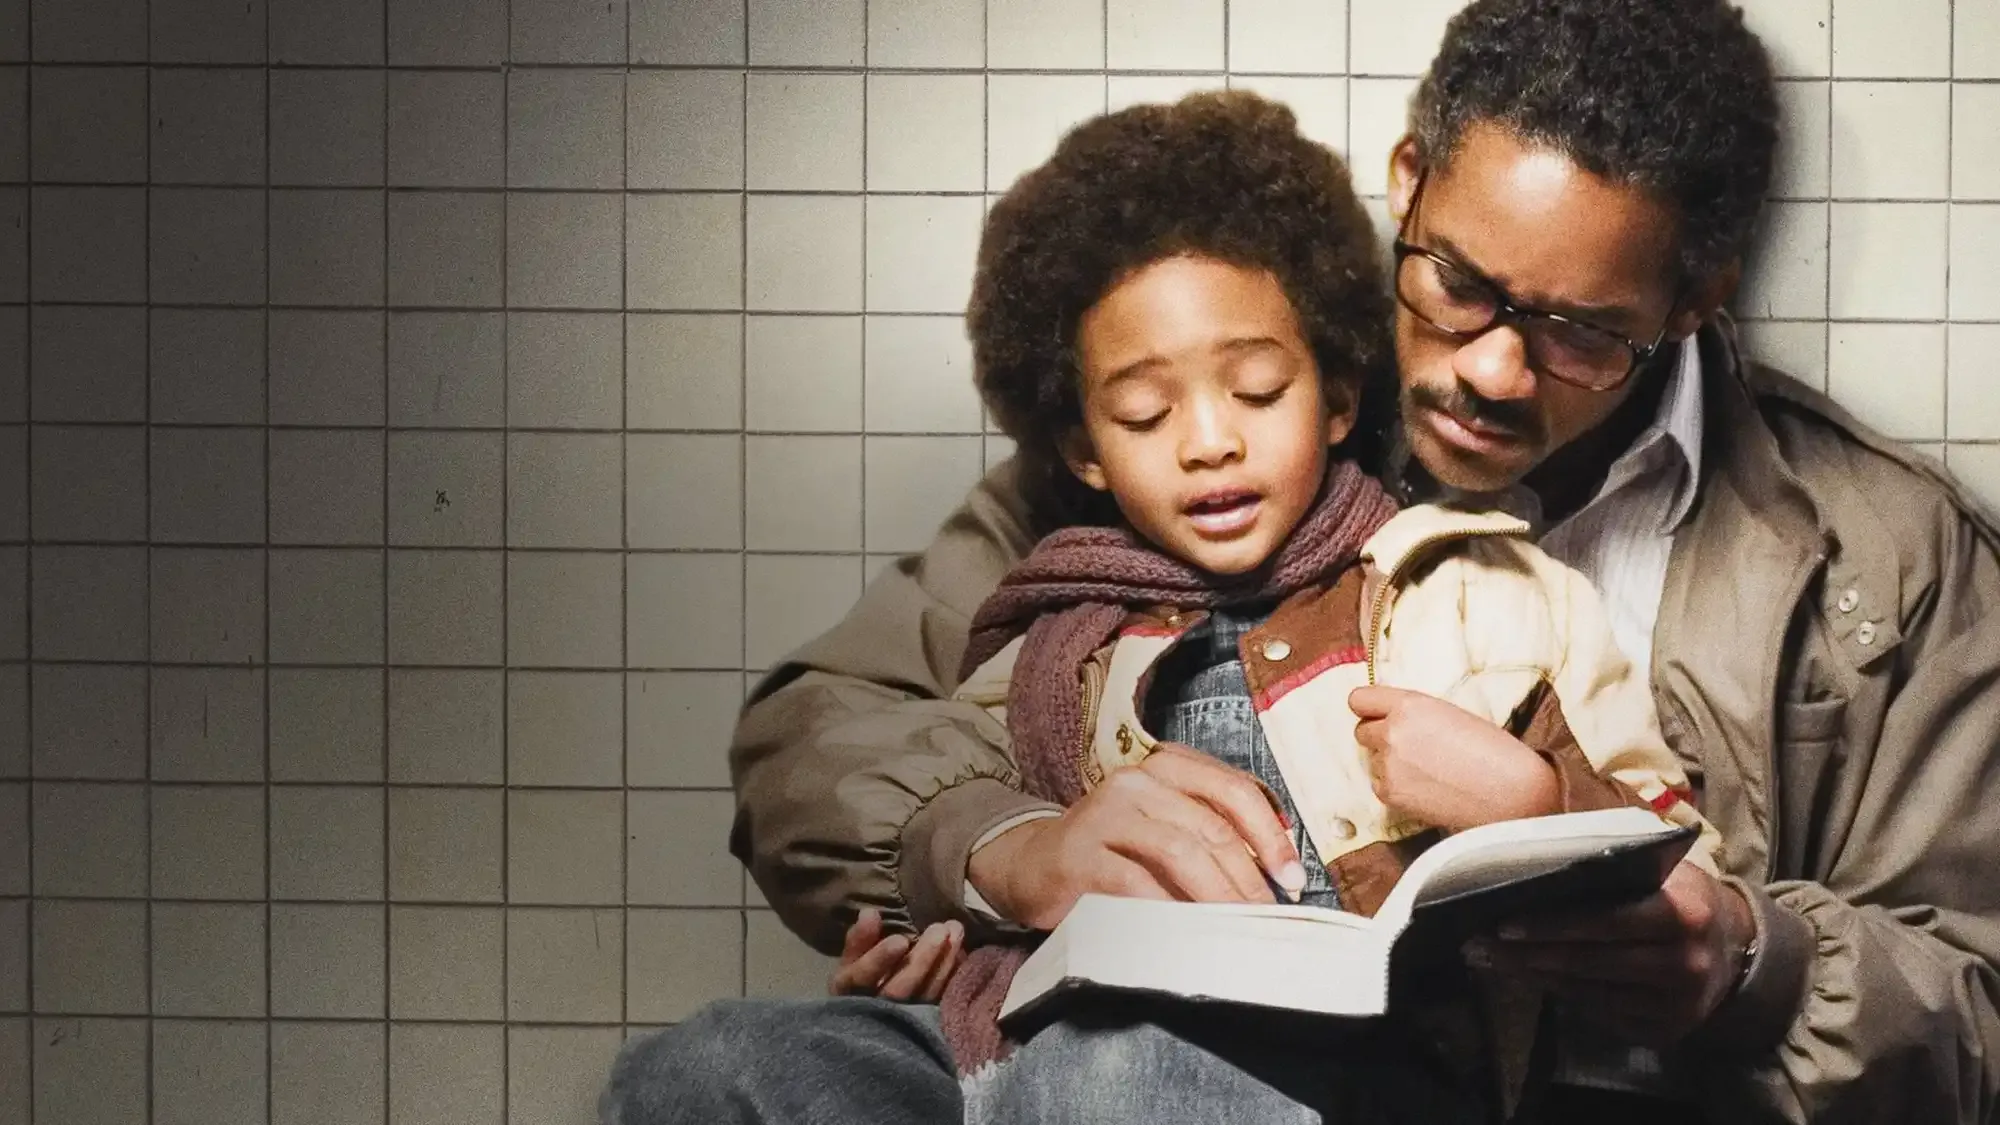 The Pursuit of Happyness movie review